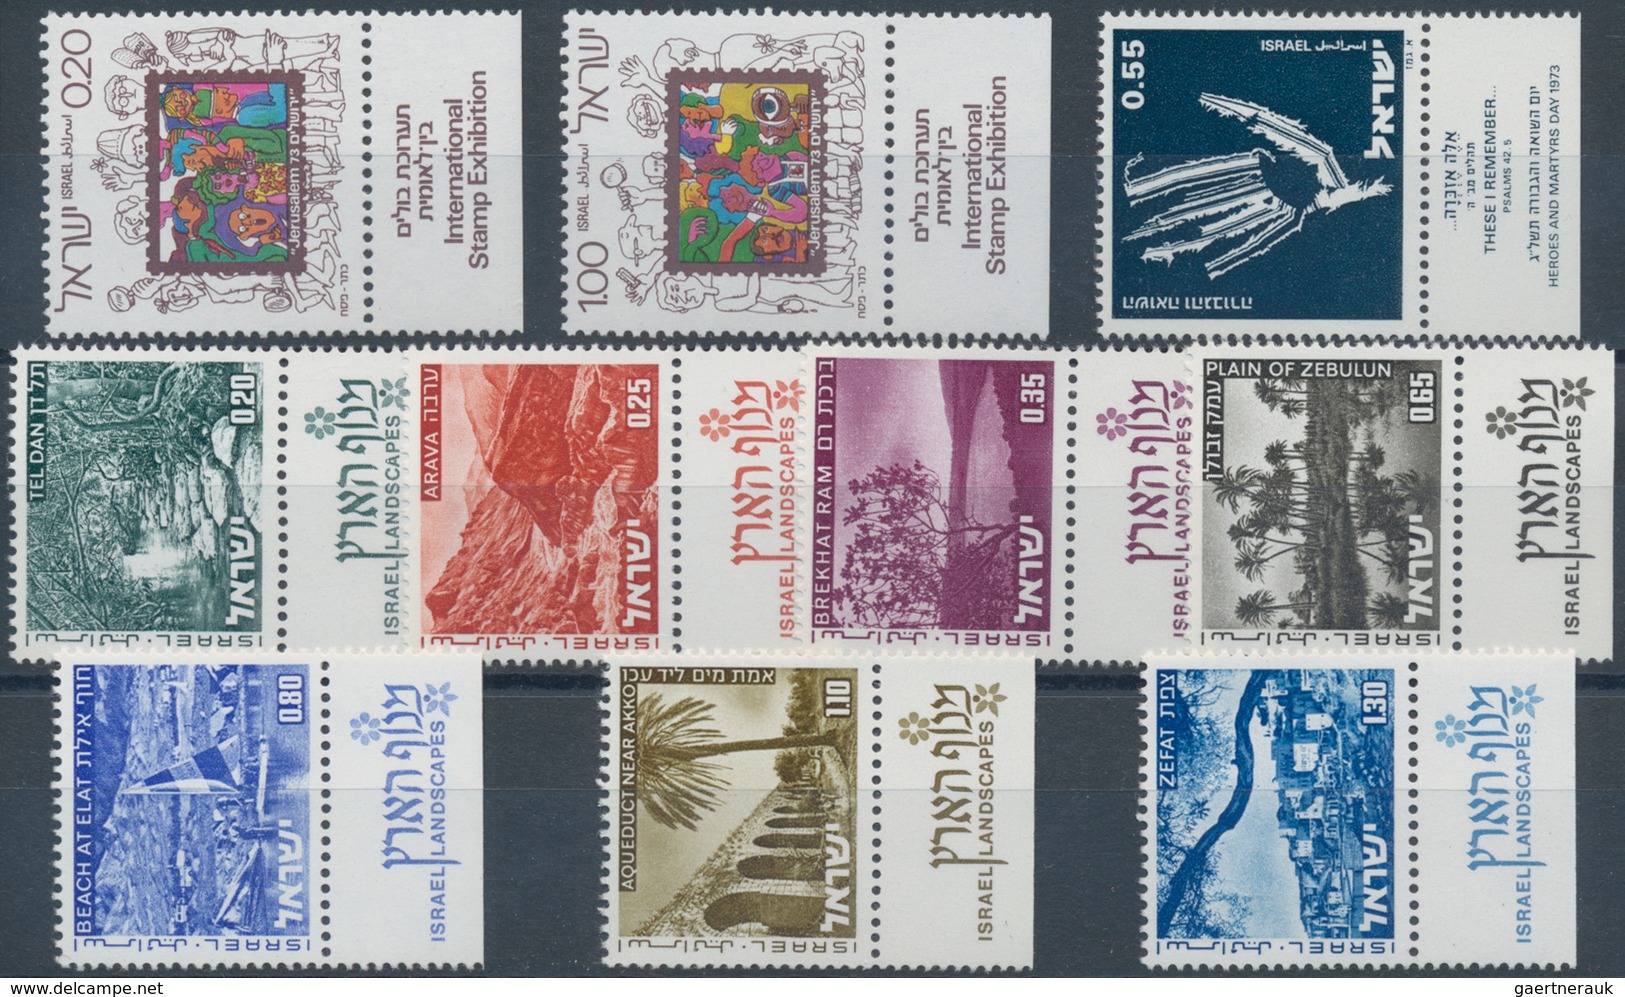 Israel: 1954/1978, huge stock with year sets in the following amounts and completeness: 1954(300); 1